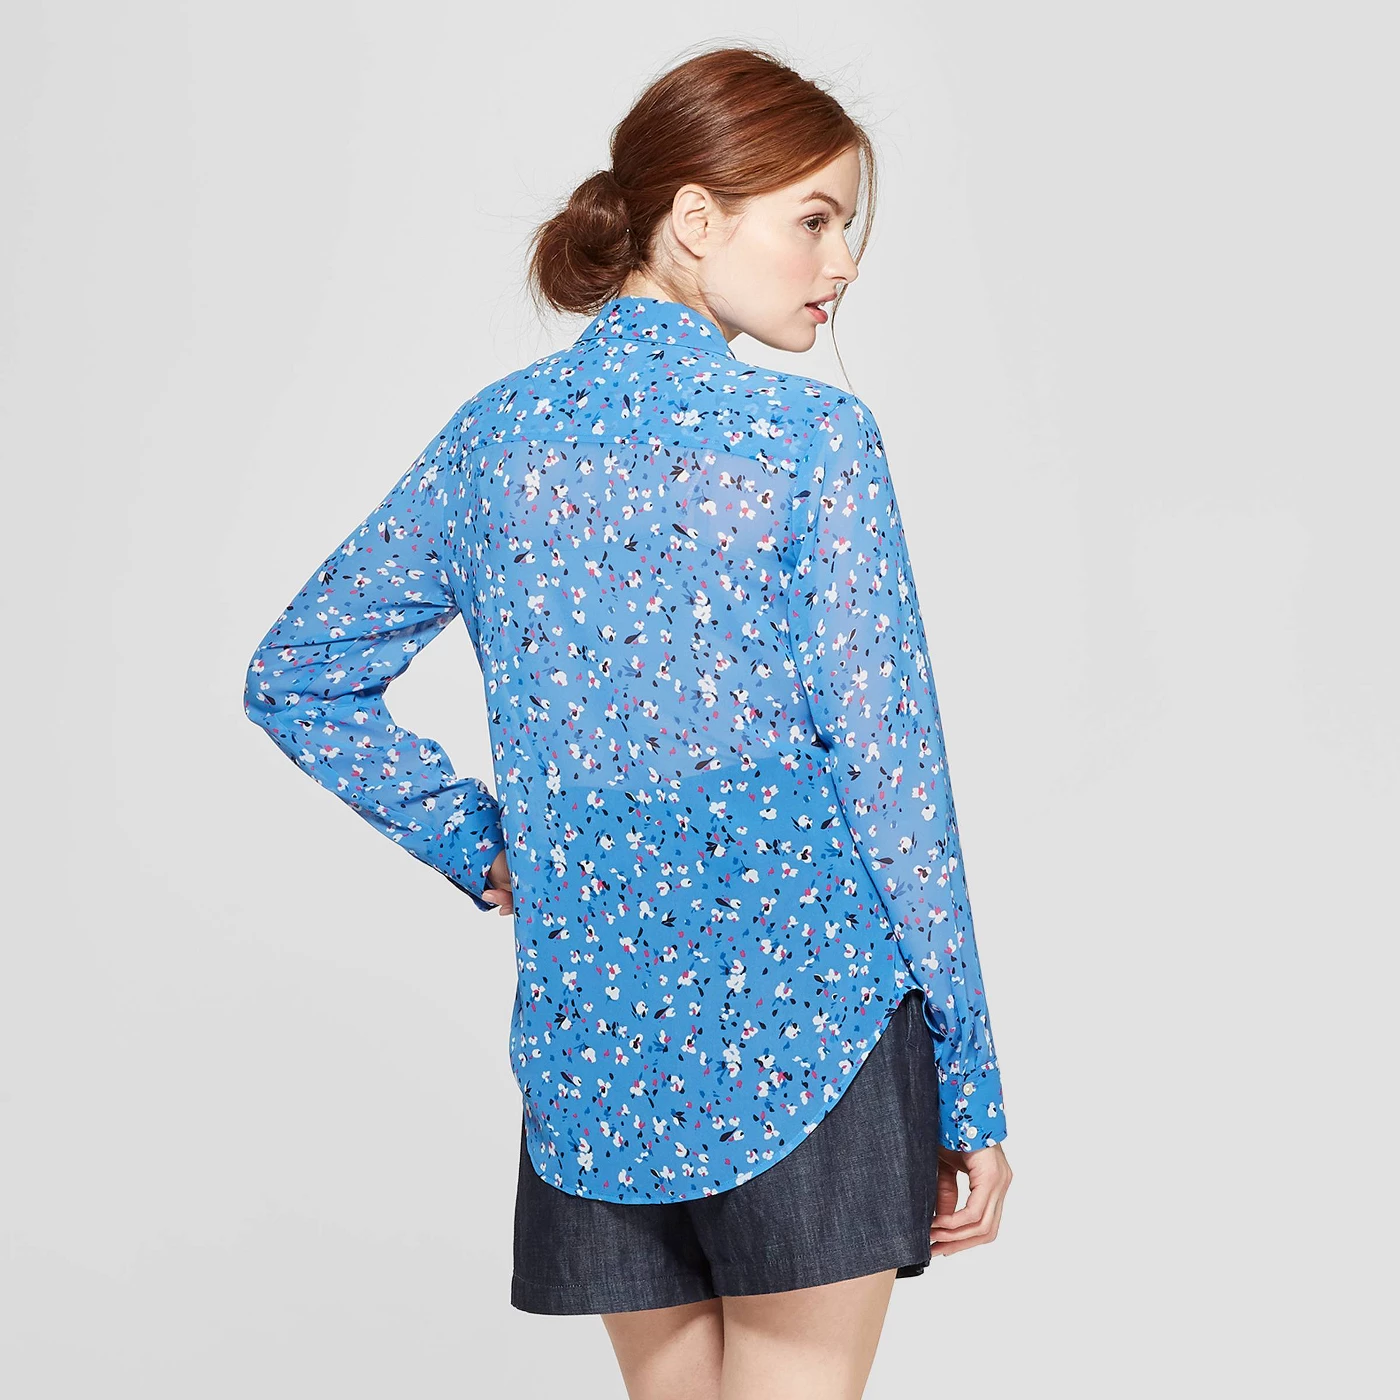 Women's Floral Print Long Sleeve Crepe Blouse - A New Dayâ„¢ Blue - image 2 of 3